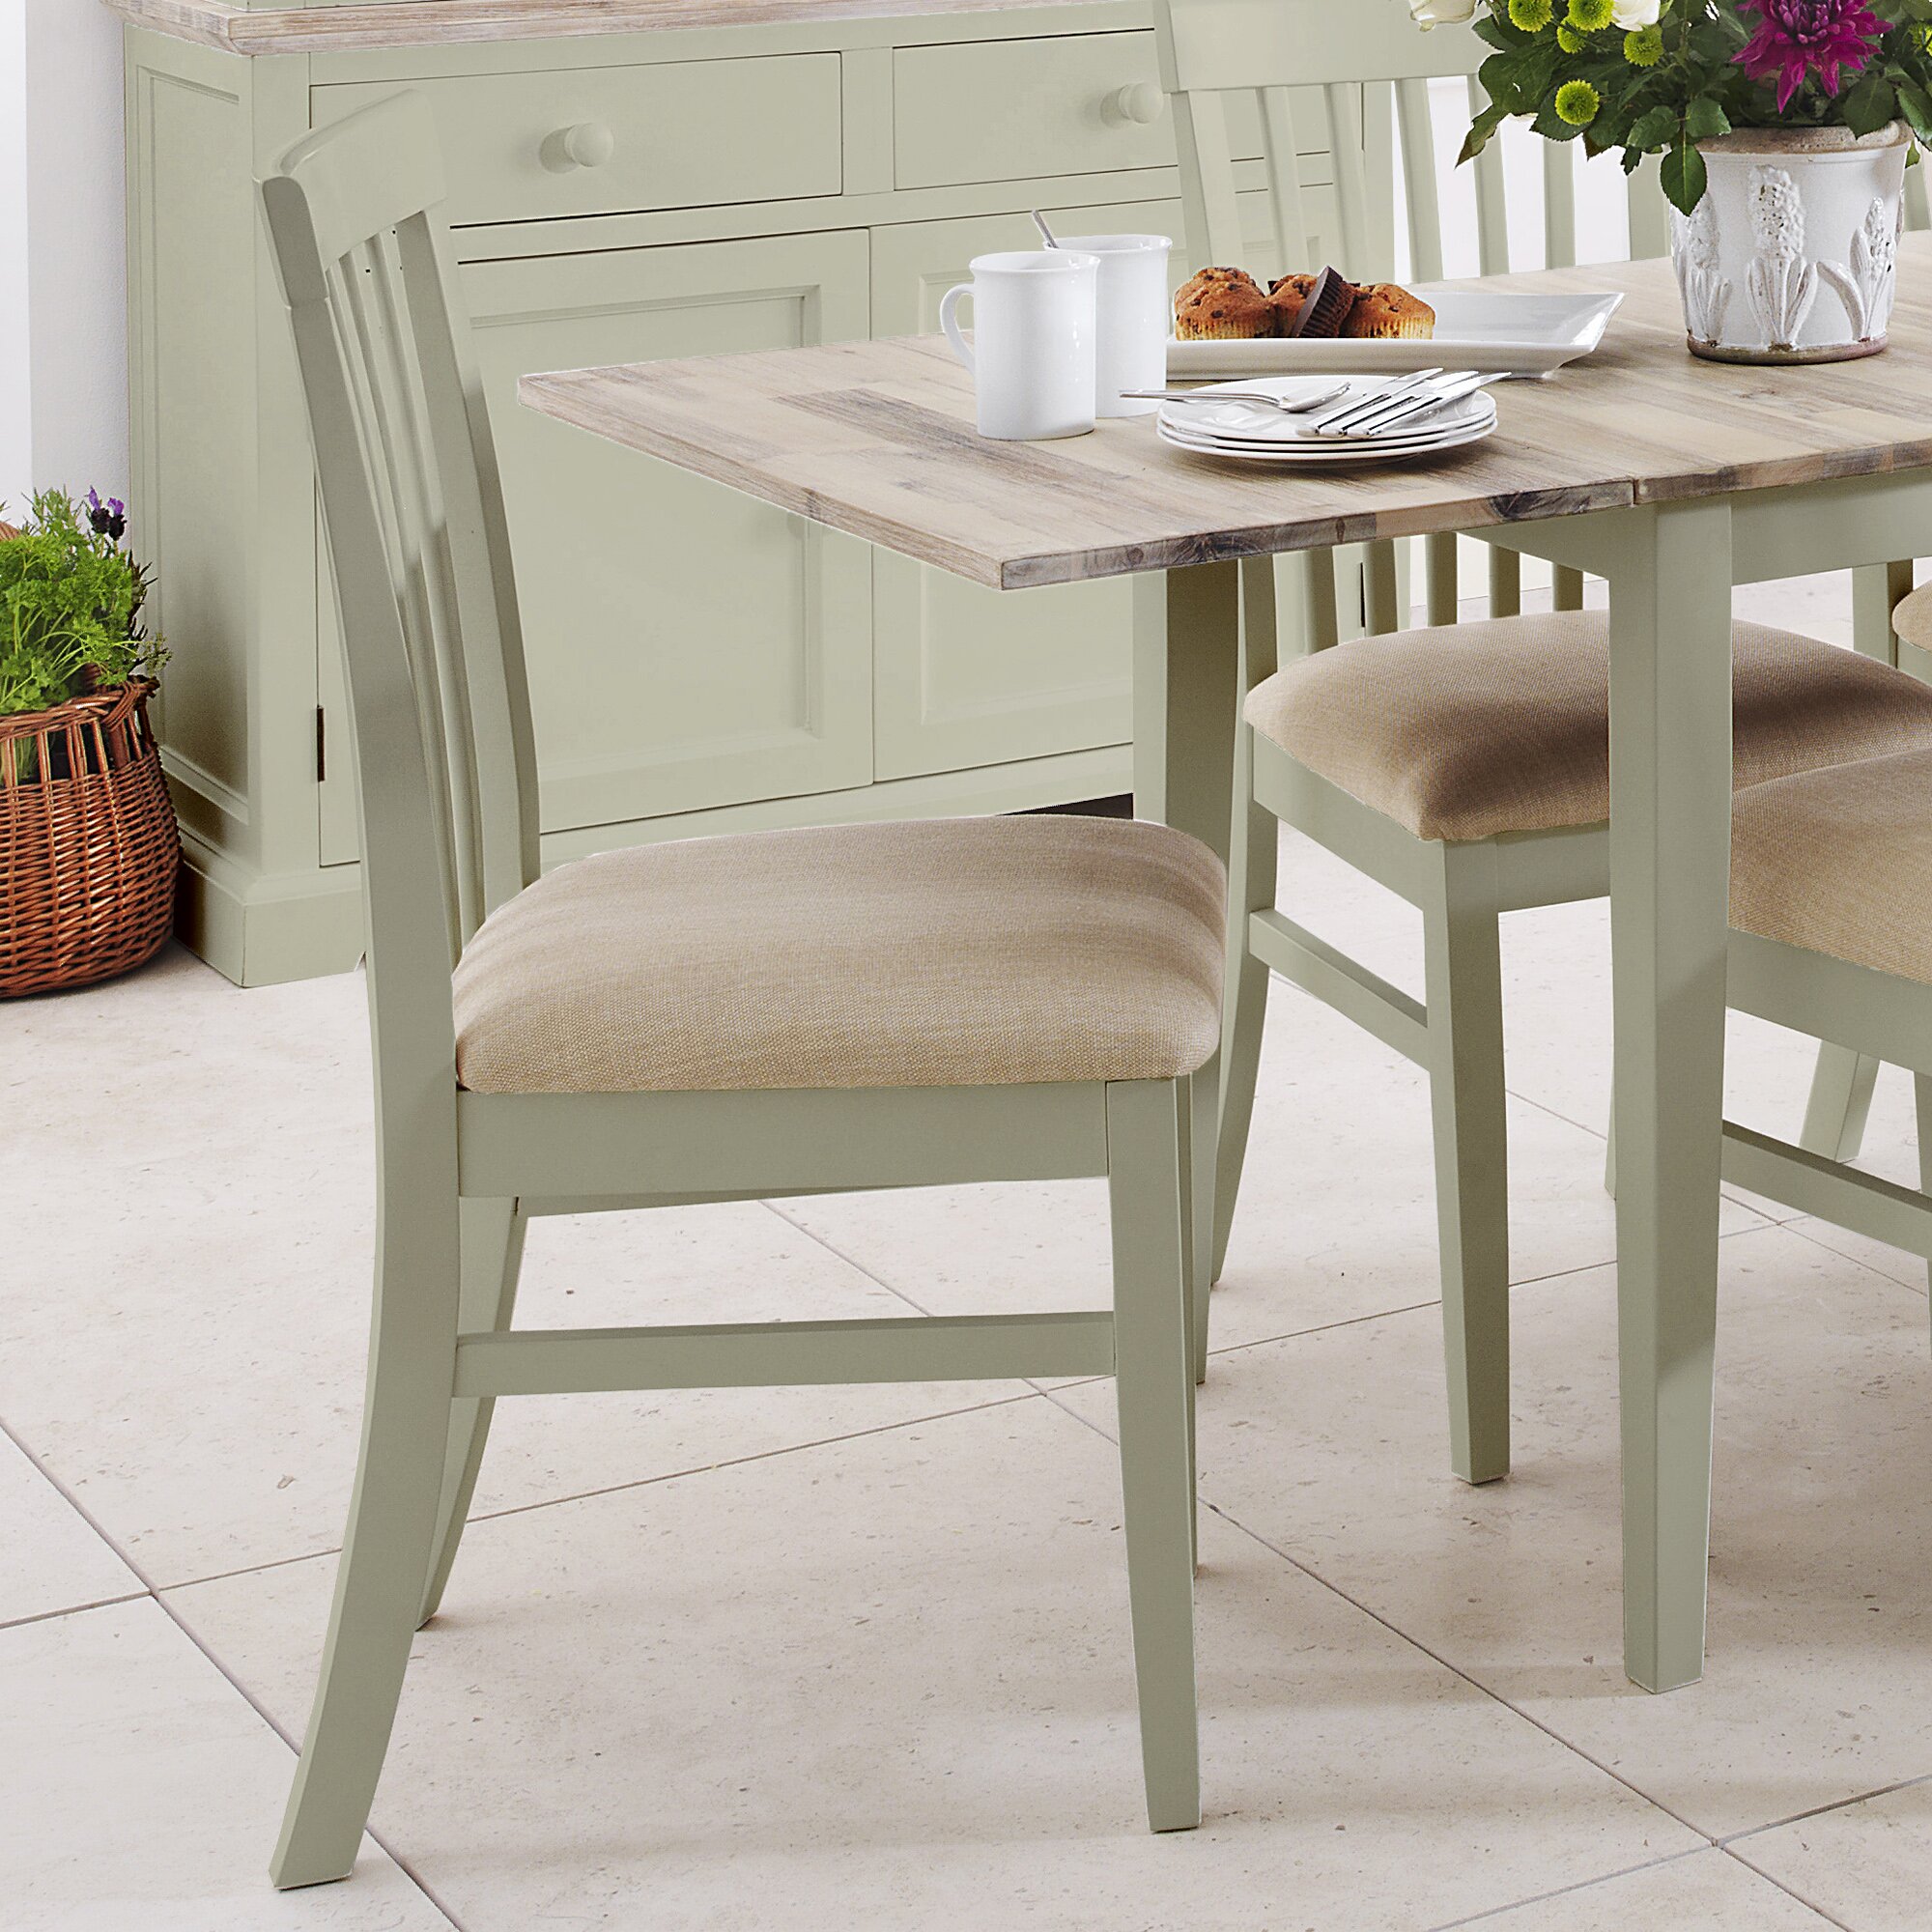 Breakwater Bay Chatham Dining Table and 6 Chairs & Reviews | Wayfair UK